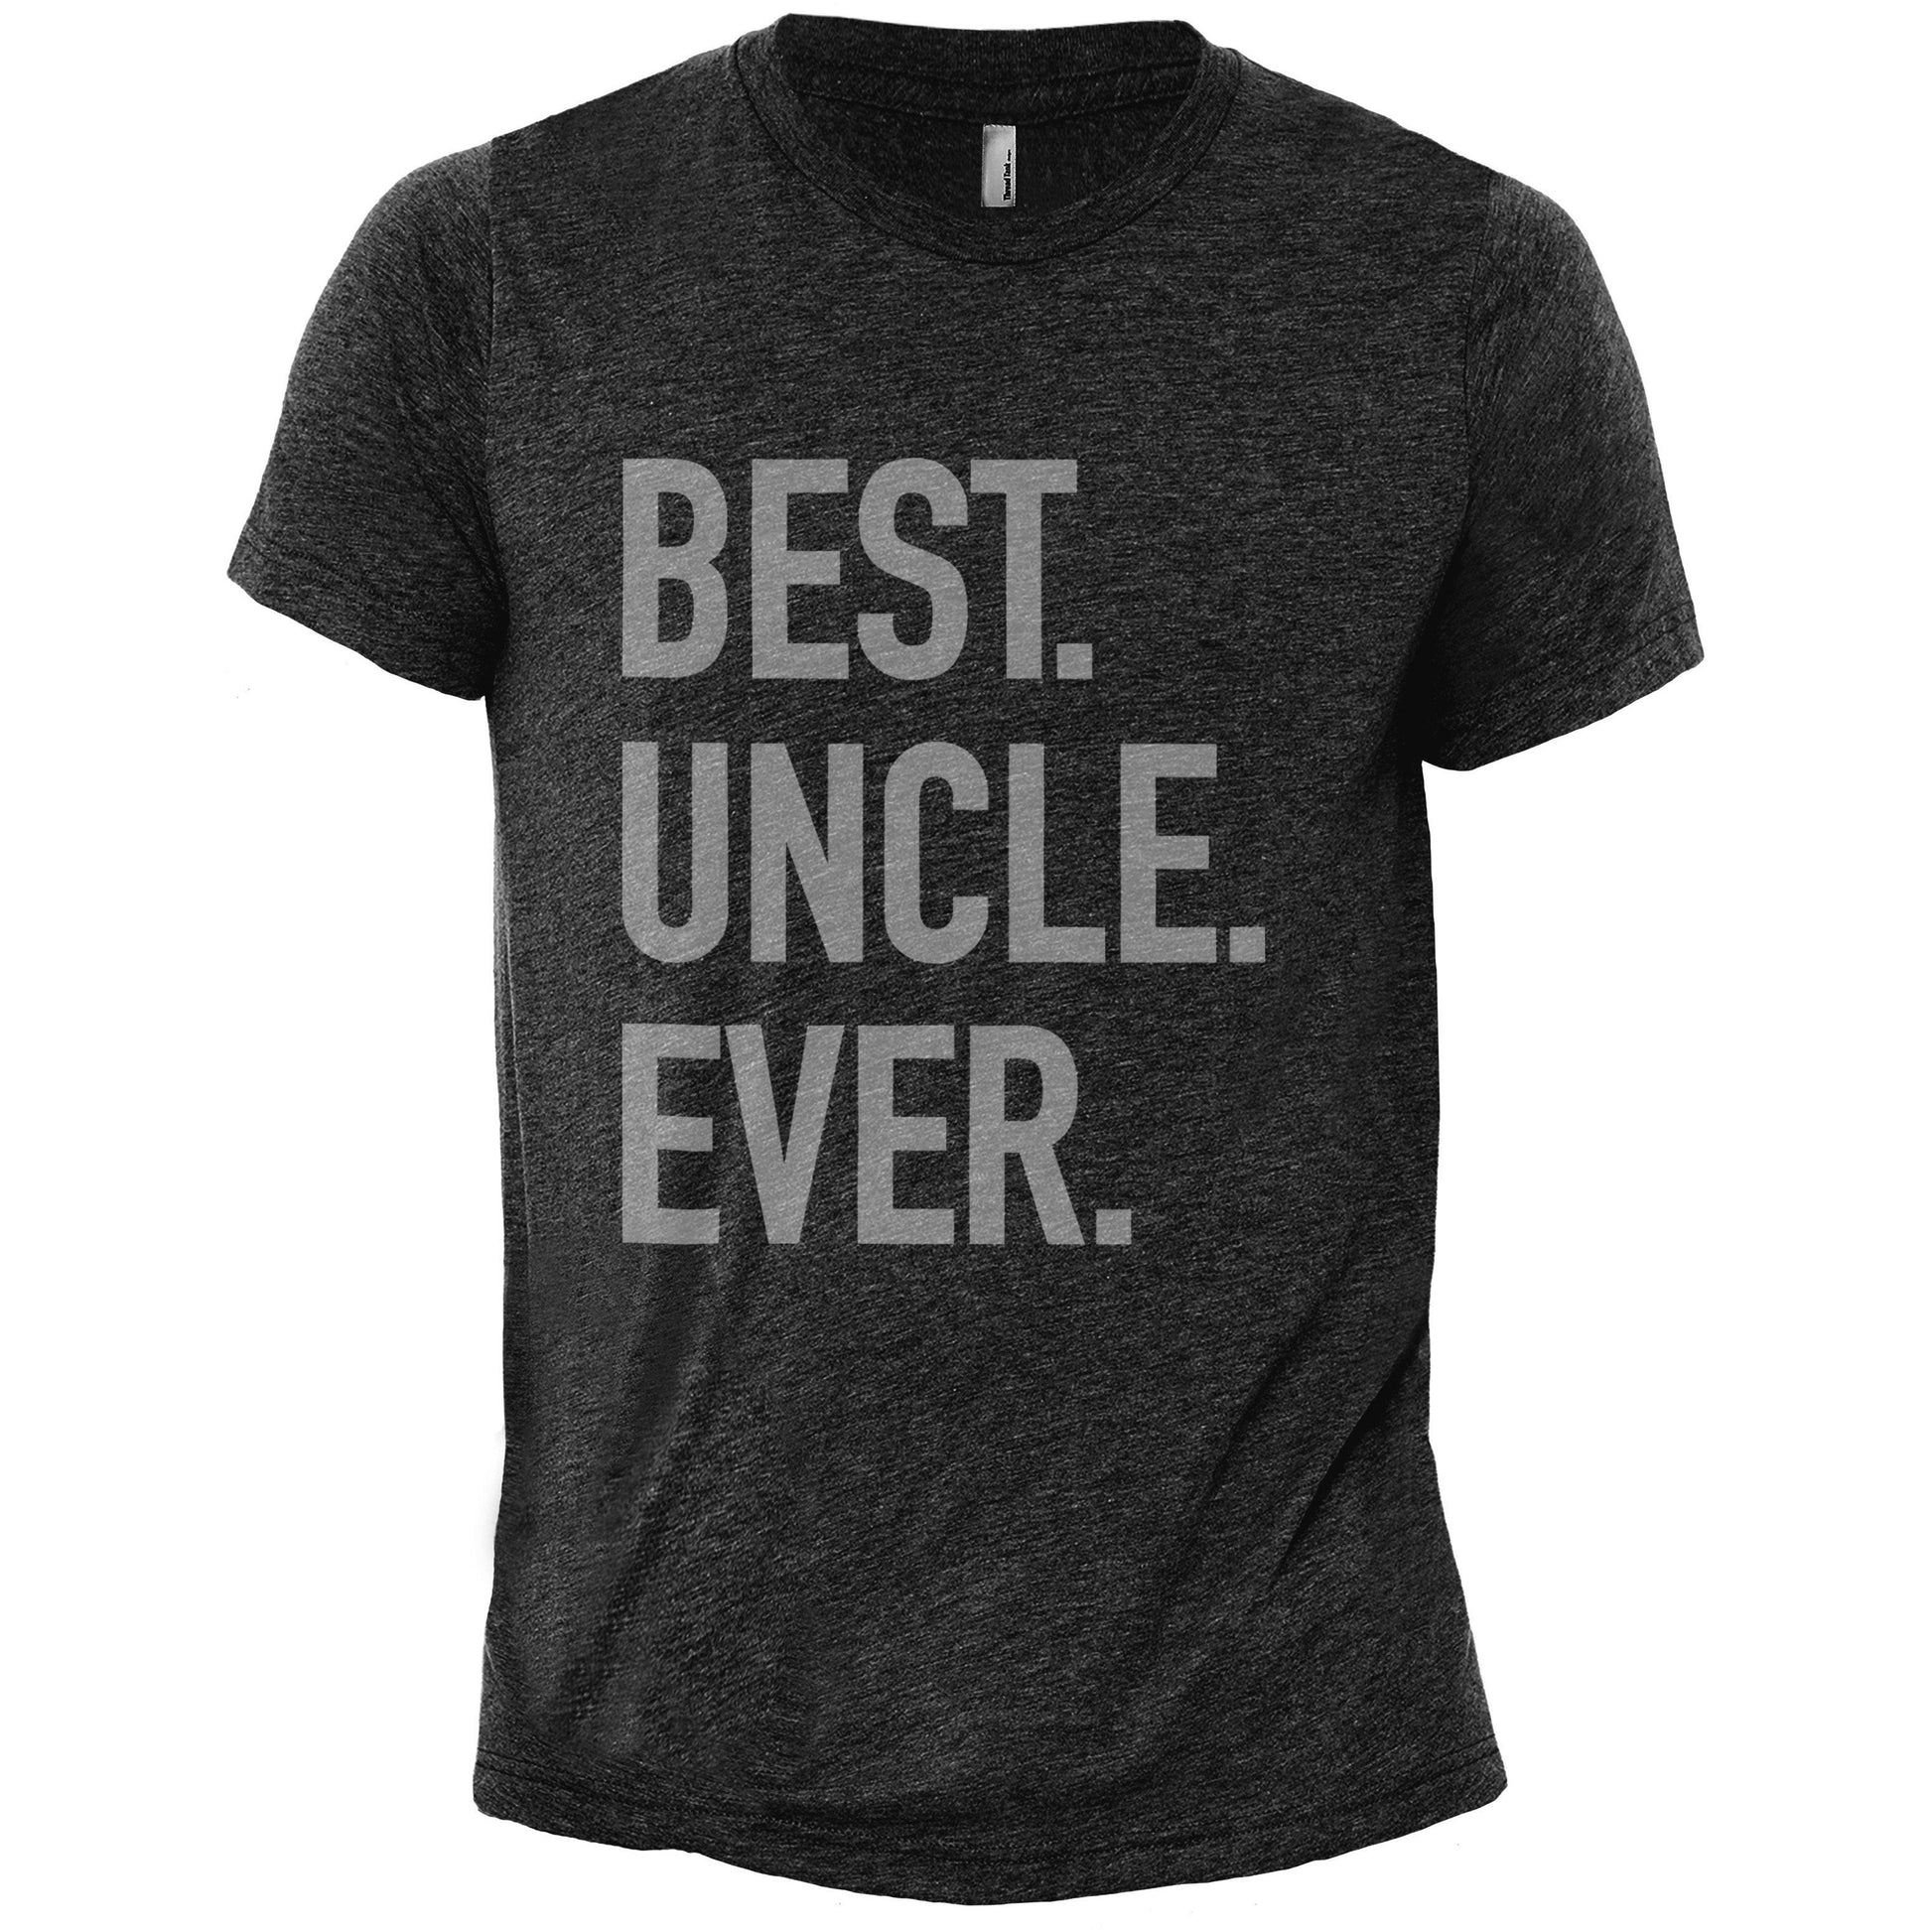 Best Uncle Ever Charcoal Printed Graphic Men's Crew T-Shirt Tee